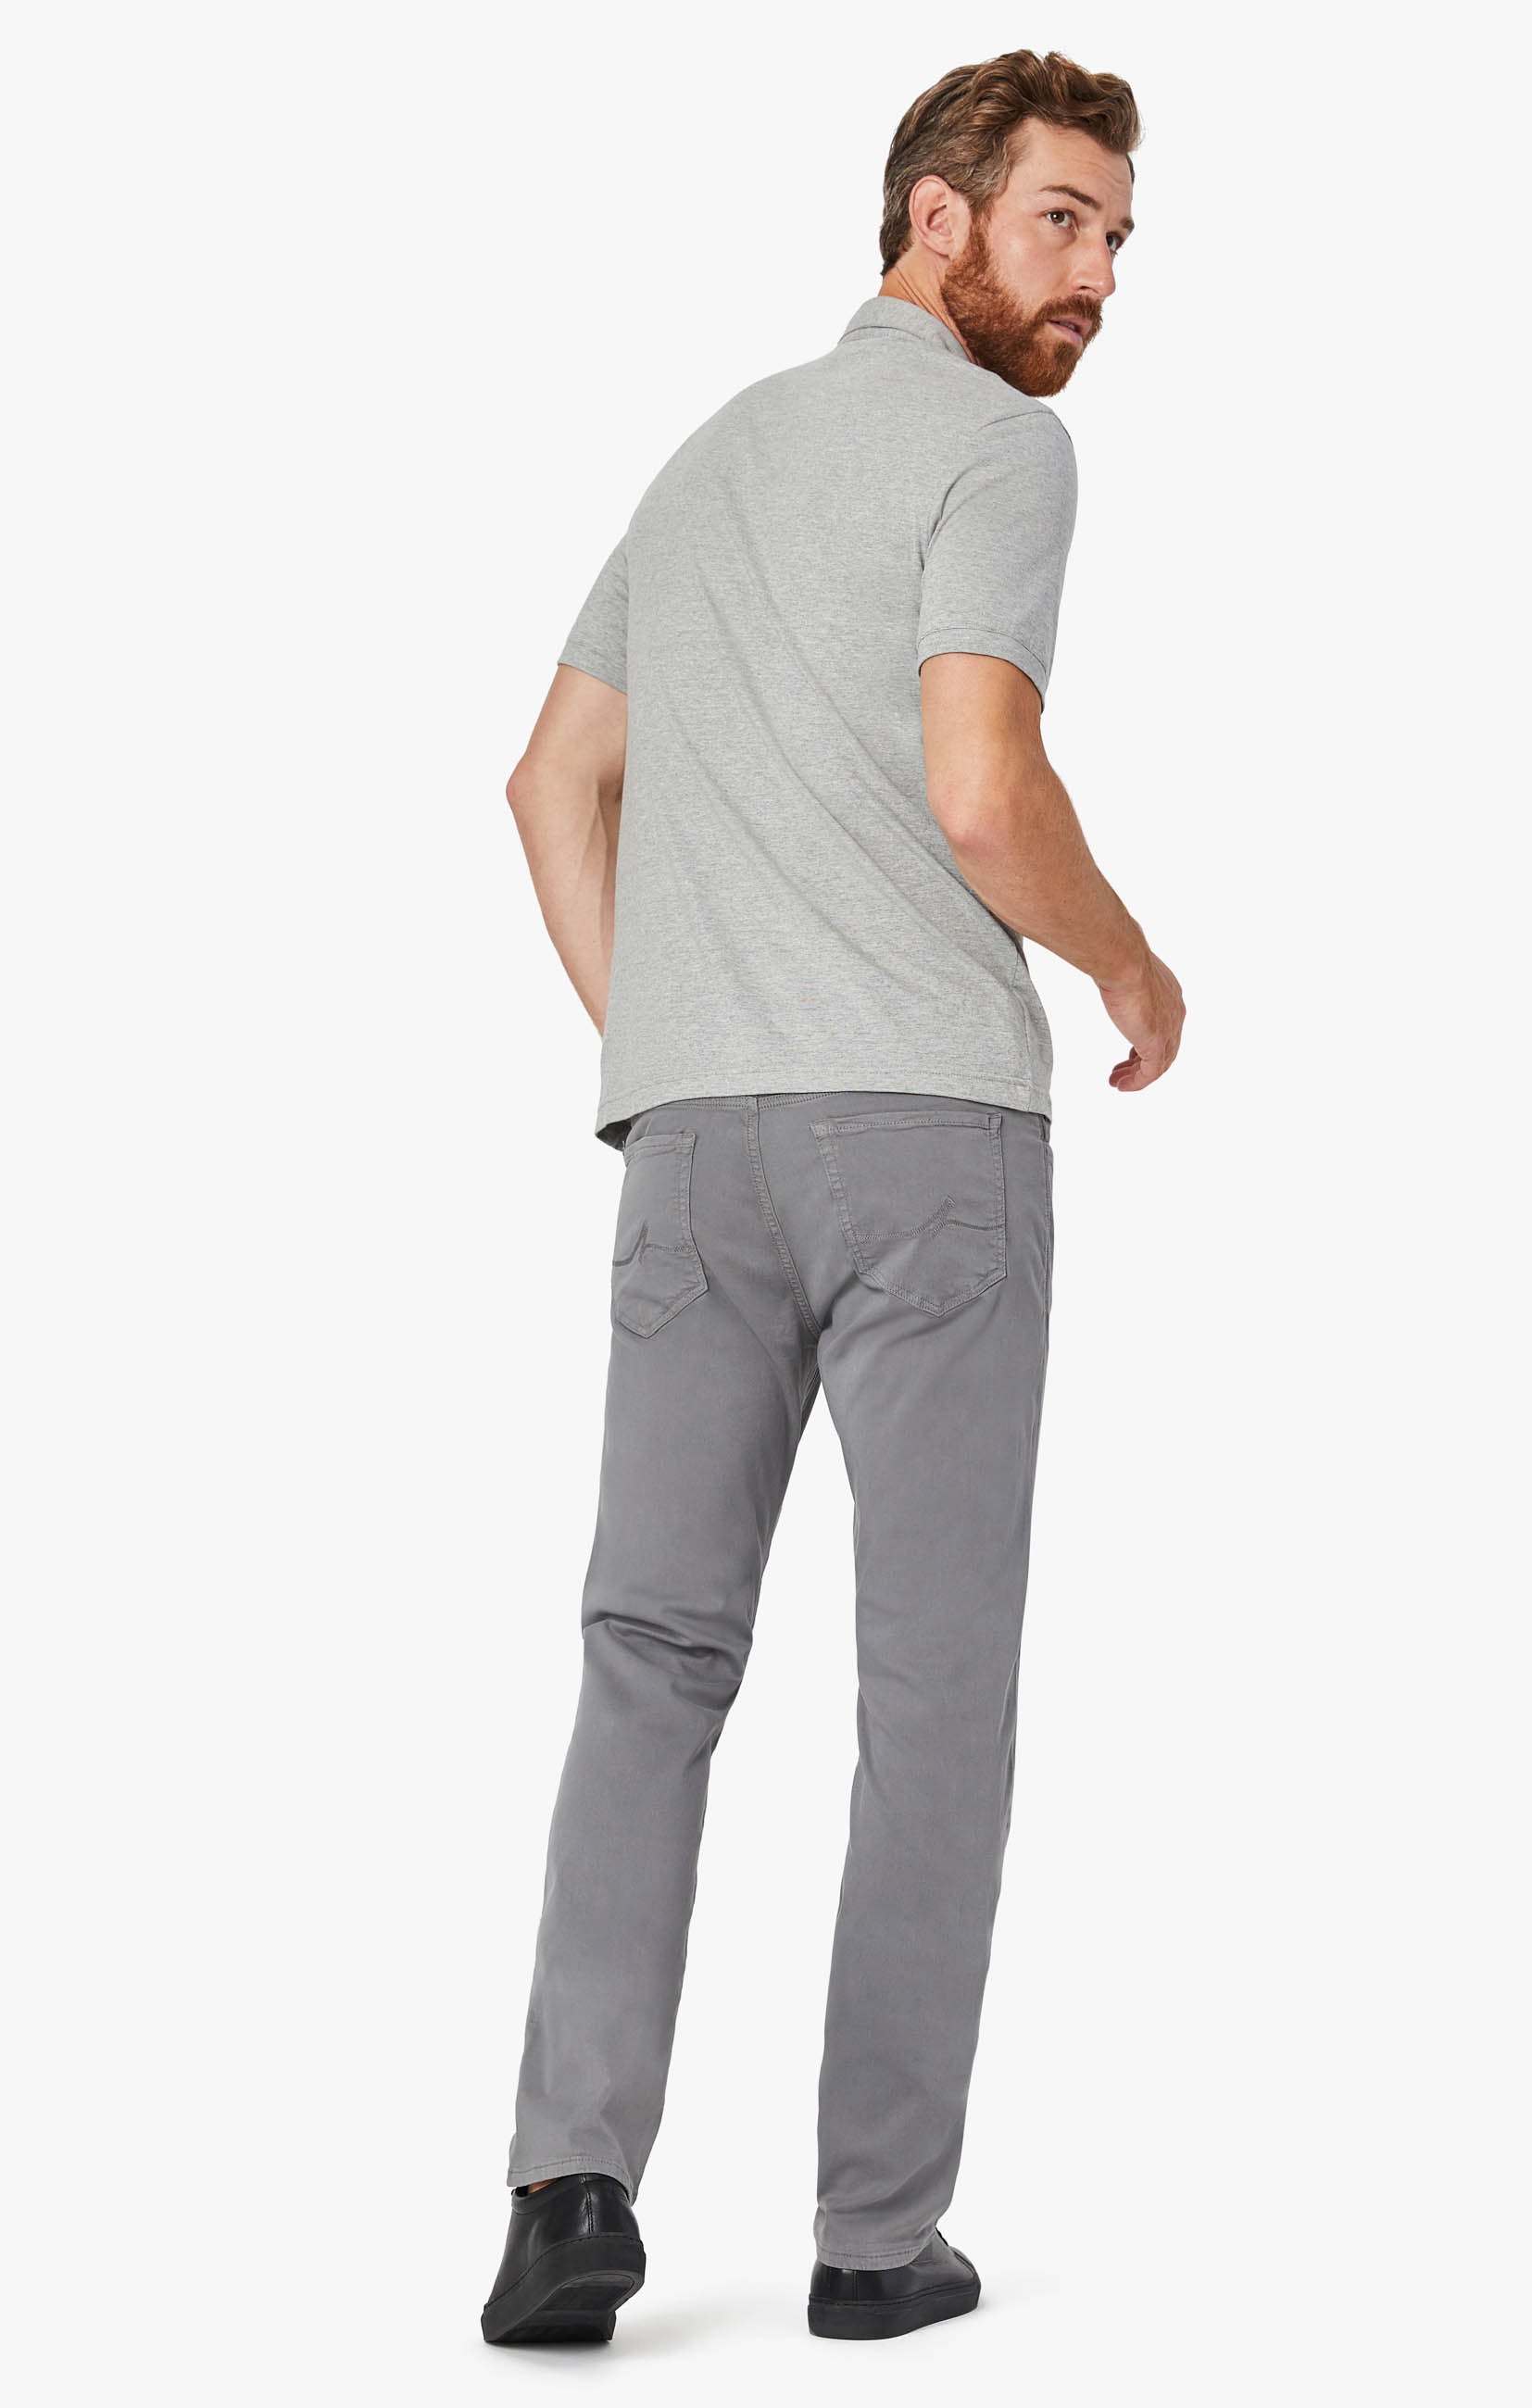 Courage Straight Leg Pants in Shark Twill Image 2